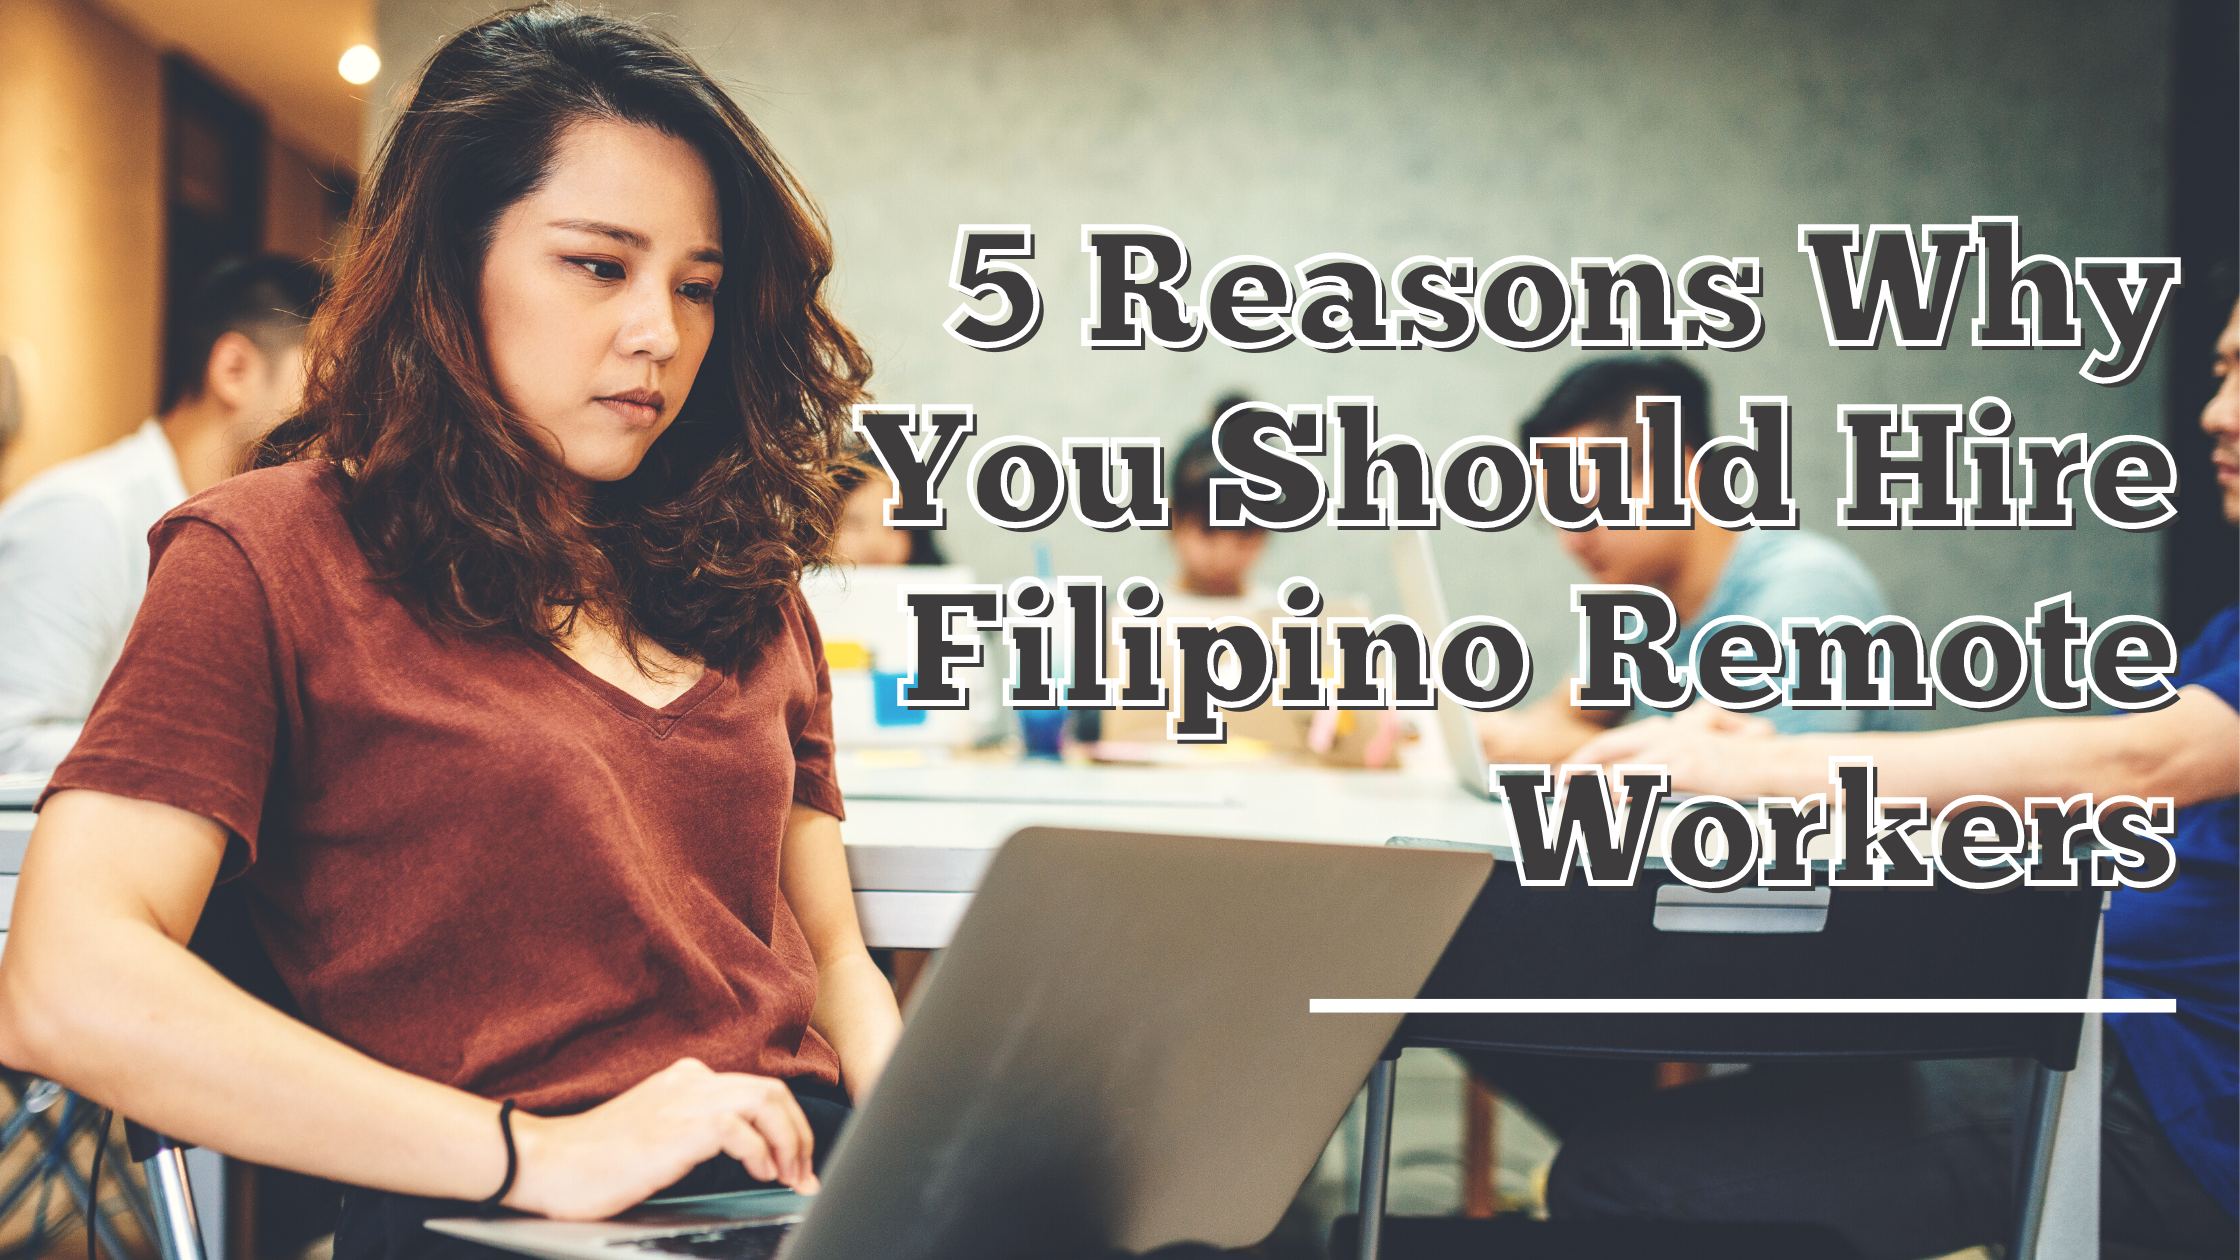 hire remote workers philippines